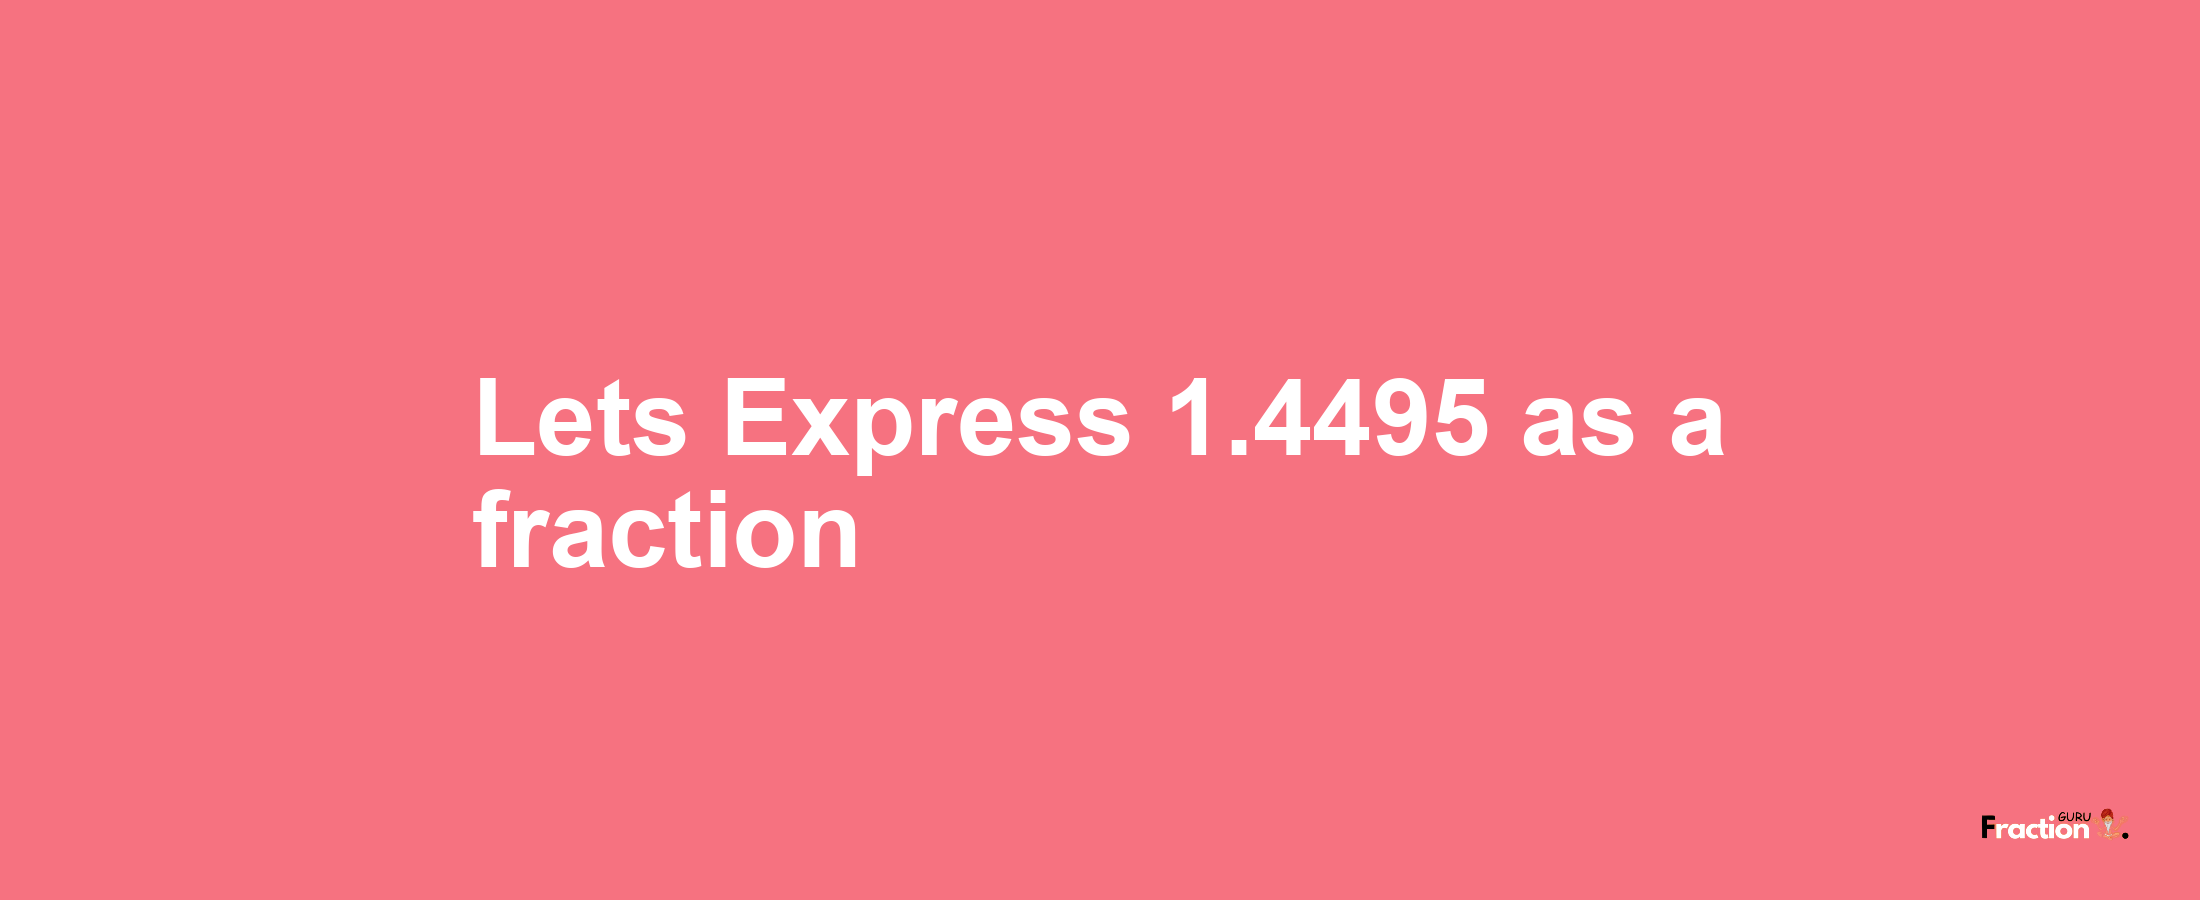 Lets Express 1.4495 as afraction